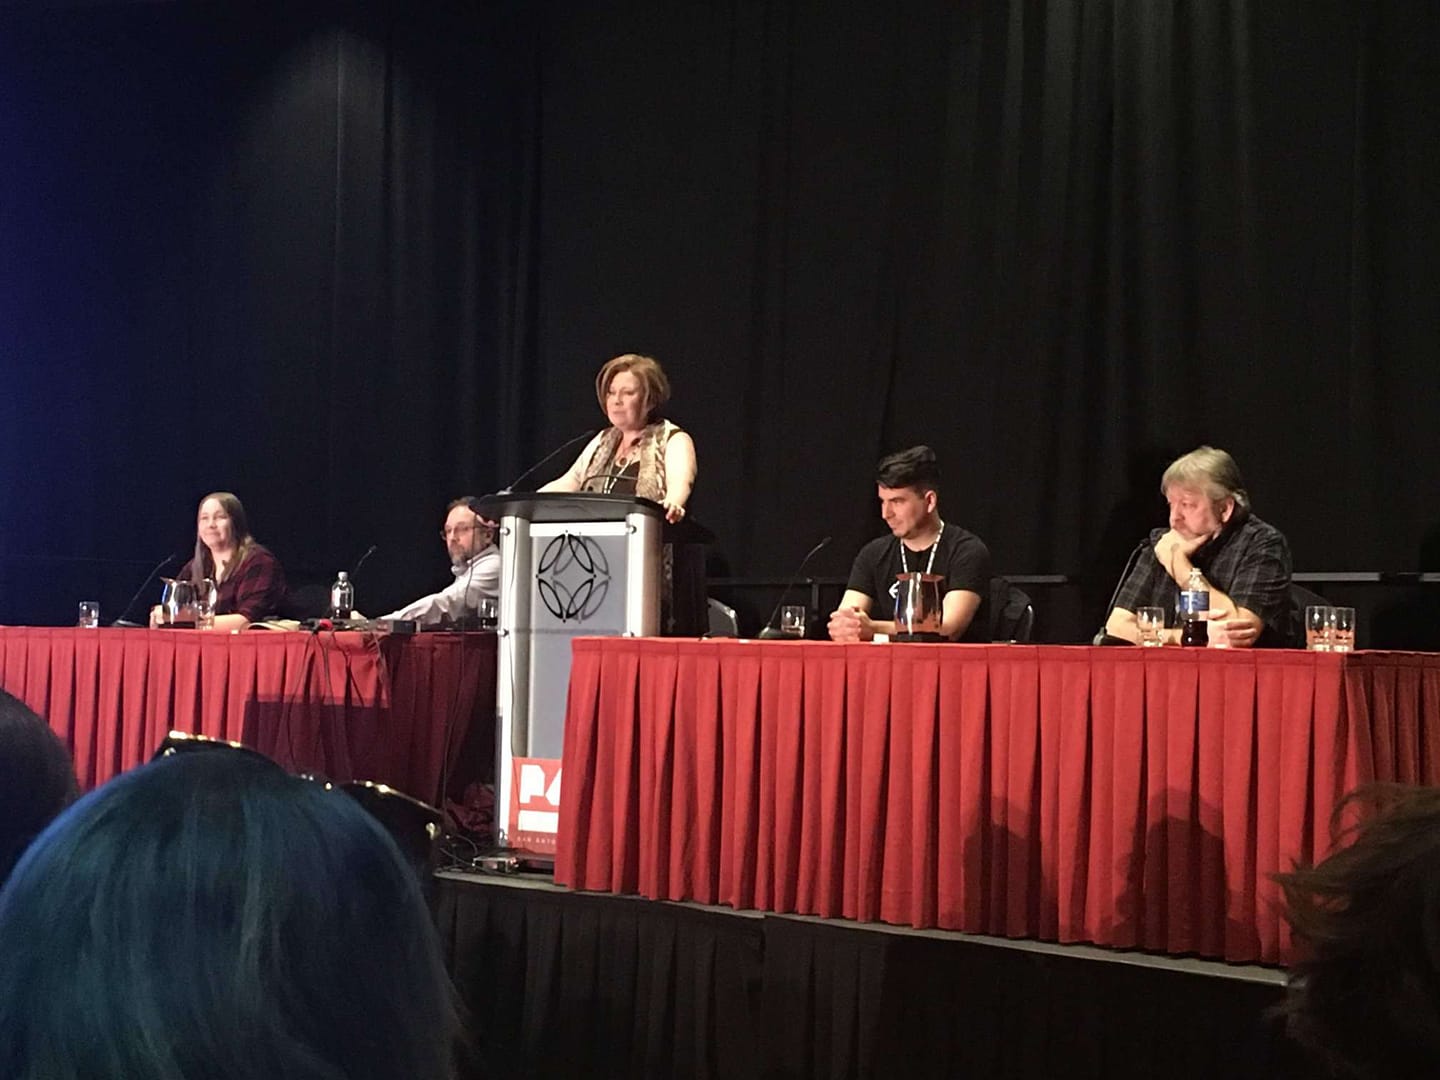 2020-Jan 20: Jimmy Lane (second from right) on the PAX South game careers panel moderated by Linda Carlson